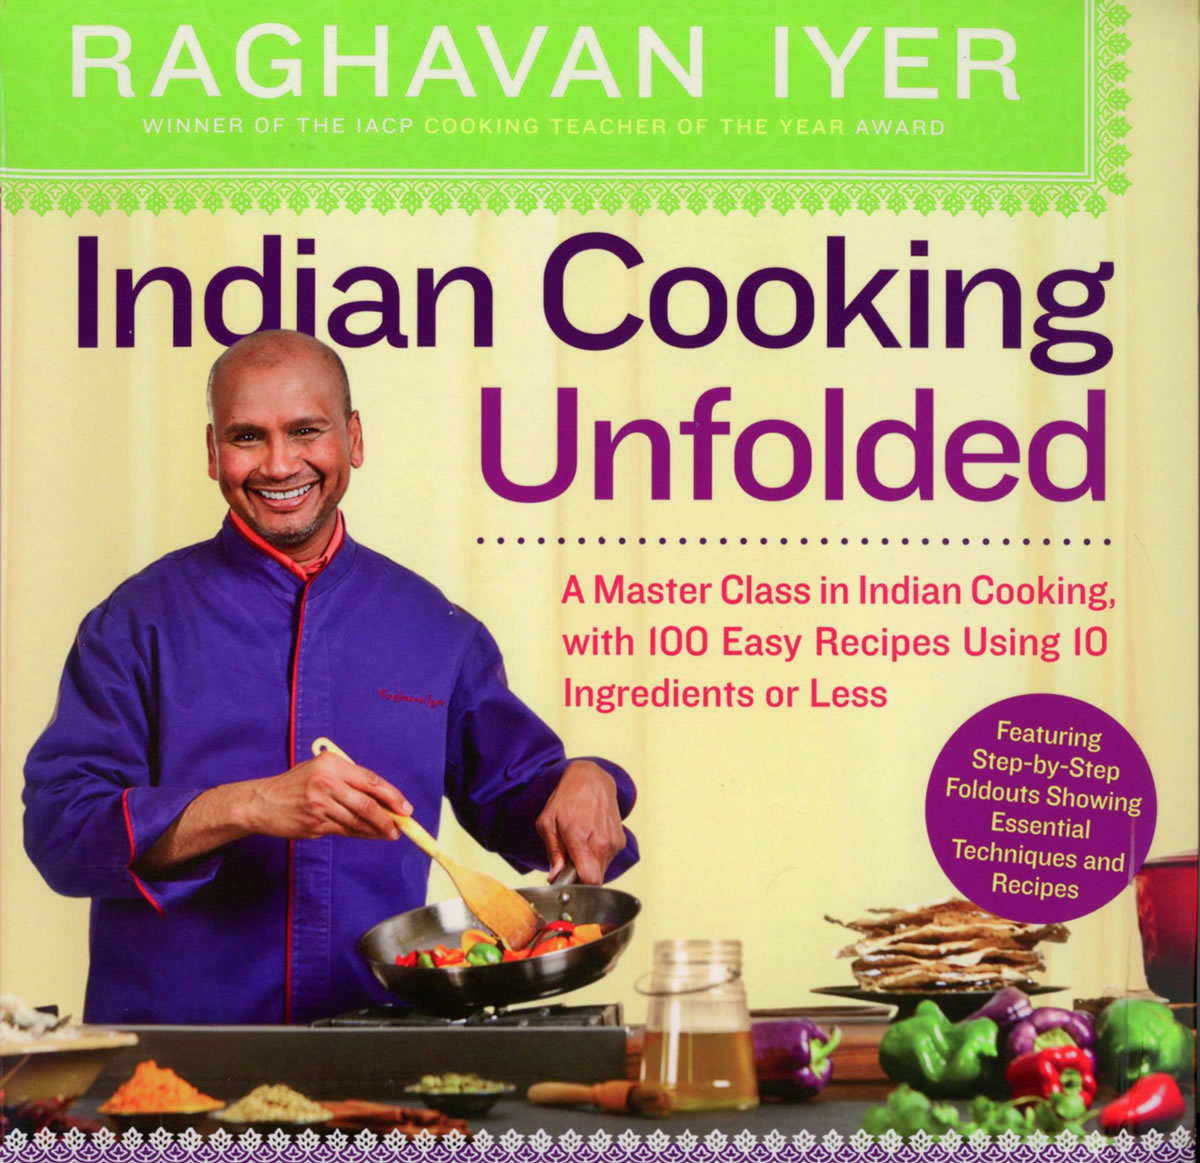 &quot;Indian Cooking Unfolded,&quot; by Raghavan Iyer, is an easy guide for learning the basics of Indian cooking, with detailed instructions and simple recipes, many of which include 10 ingredients or fewer.